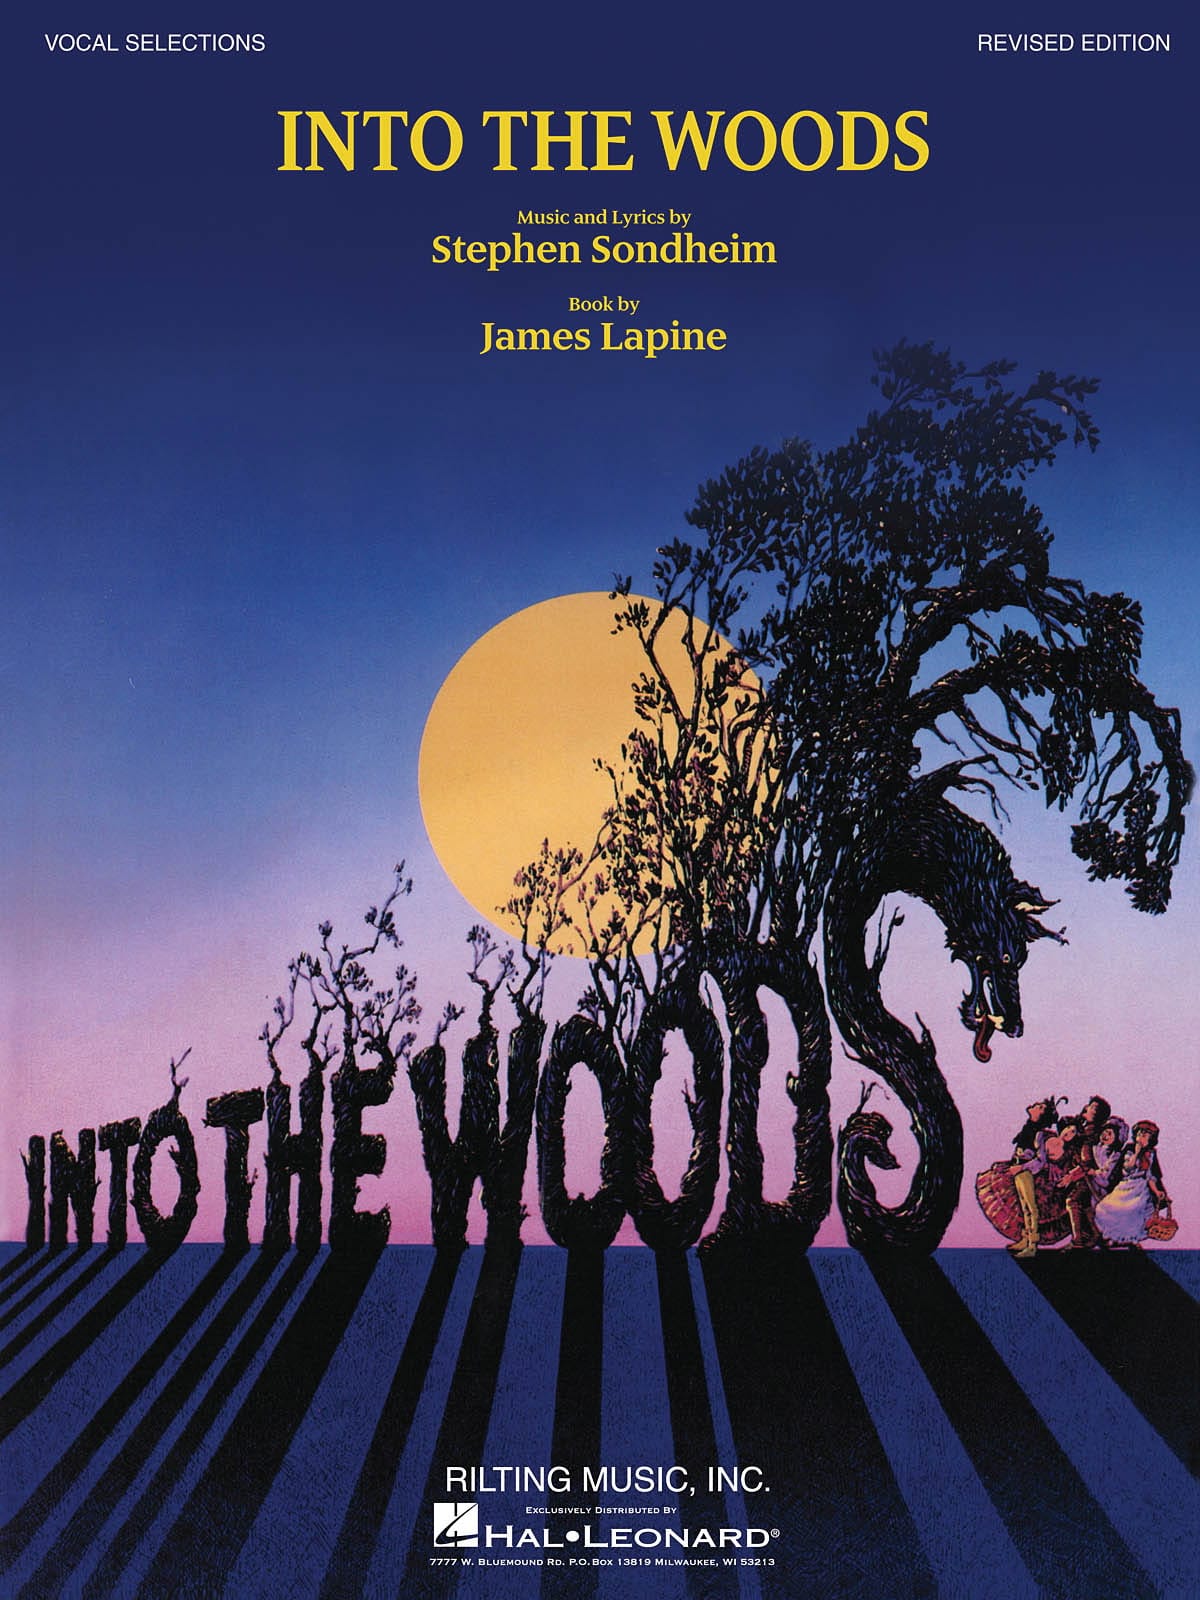 Stephen Sondheim Into The Woods Vocal Selections Revised édition Partition Di Arezzofr 